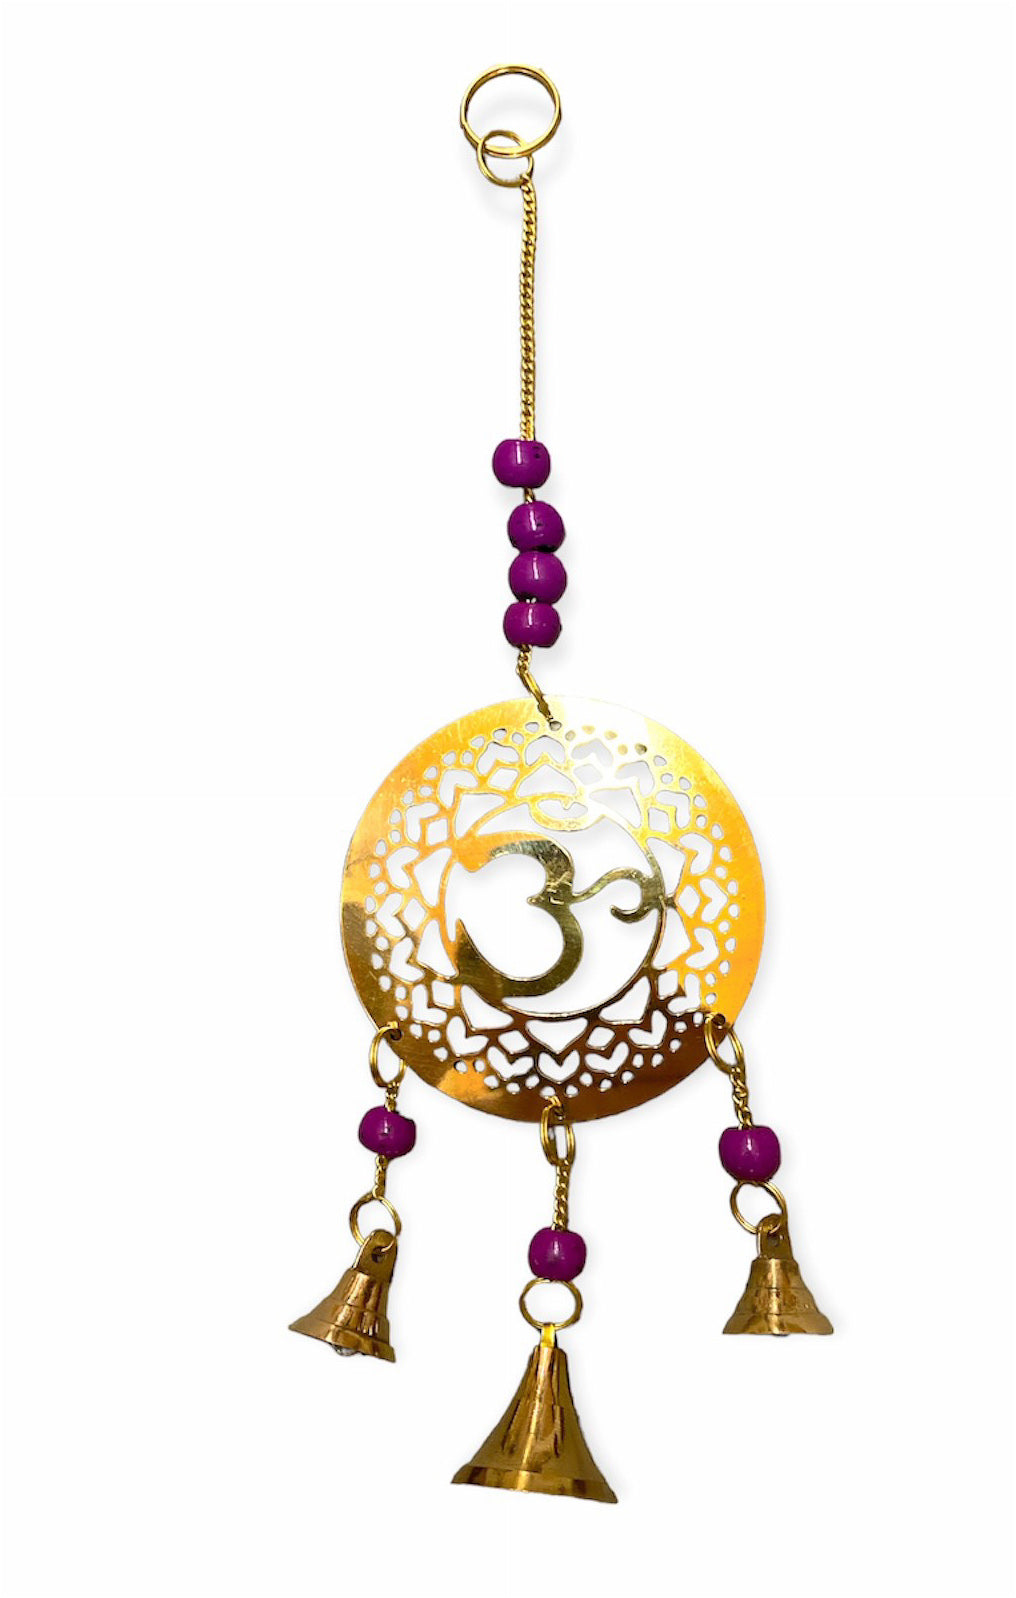 Crown Chakra Brass WIND CHIME with Violet beads 3 Bells - 11 inch - India - NEW1121